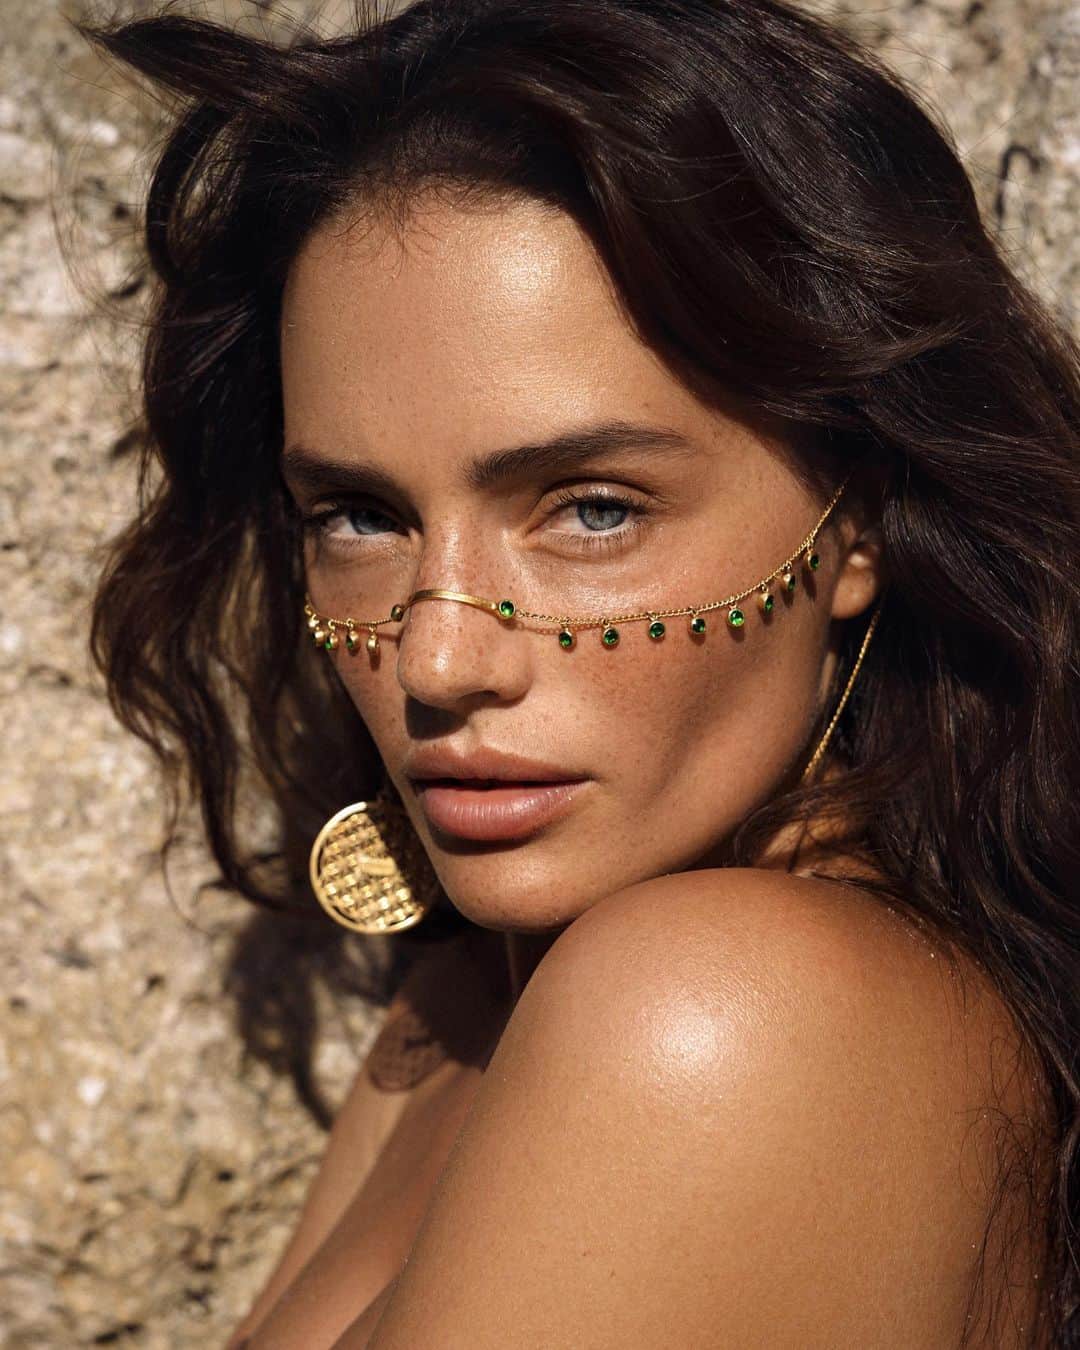 Jessicaのインスタグラム：「Mama still got it. A quick hour shoot with the talented @akimov__aleksandr__ in Bali   #mamastillgotit #bali #photo #jewelry #sunkissed #freckles」